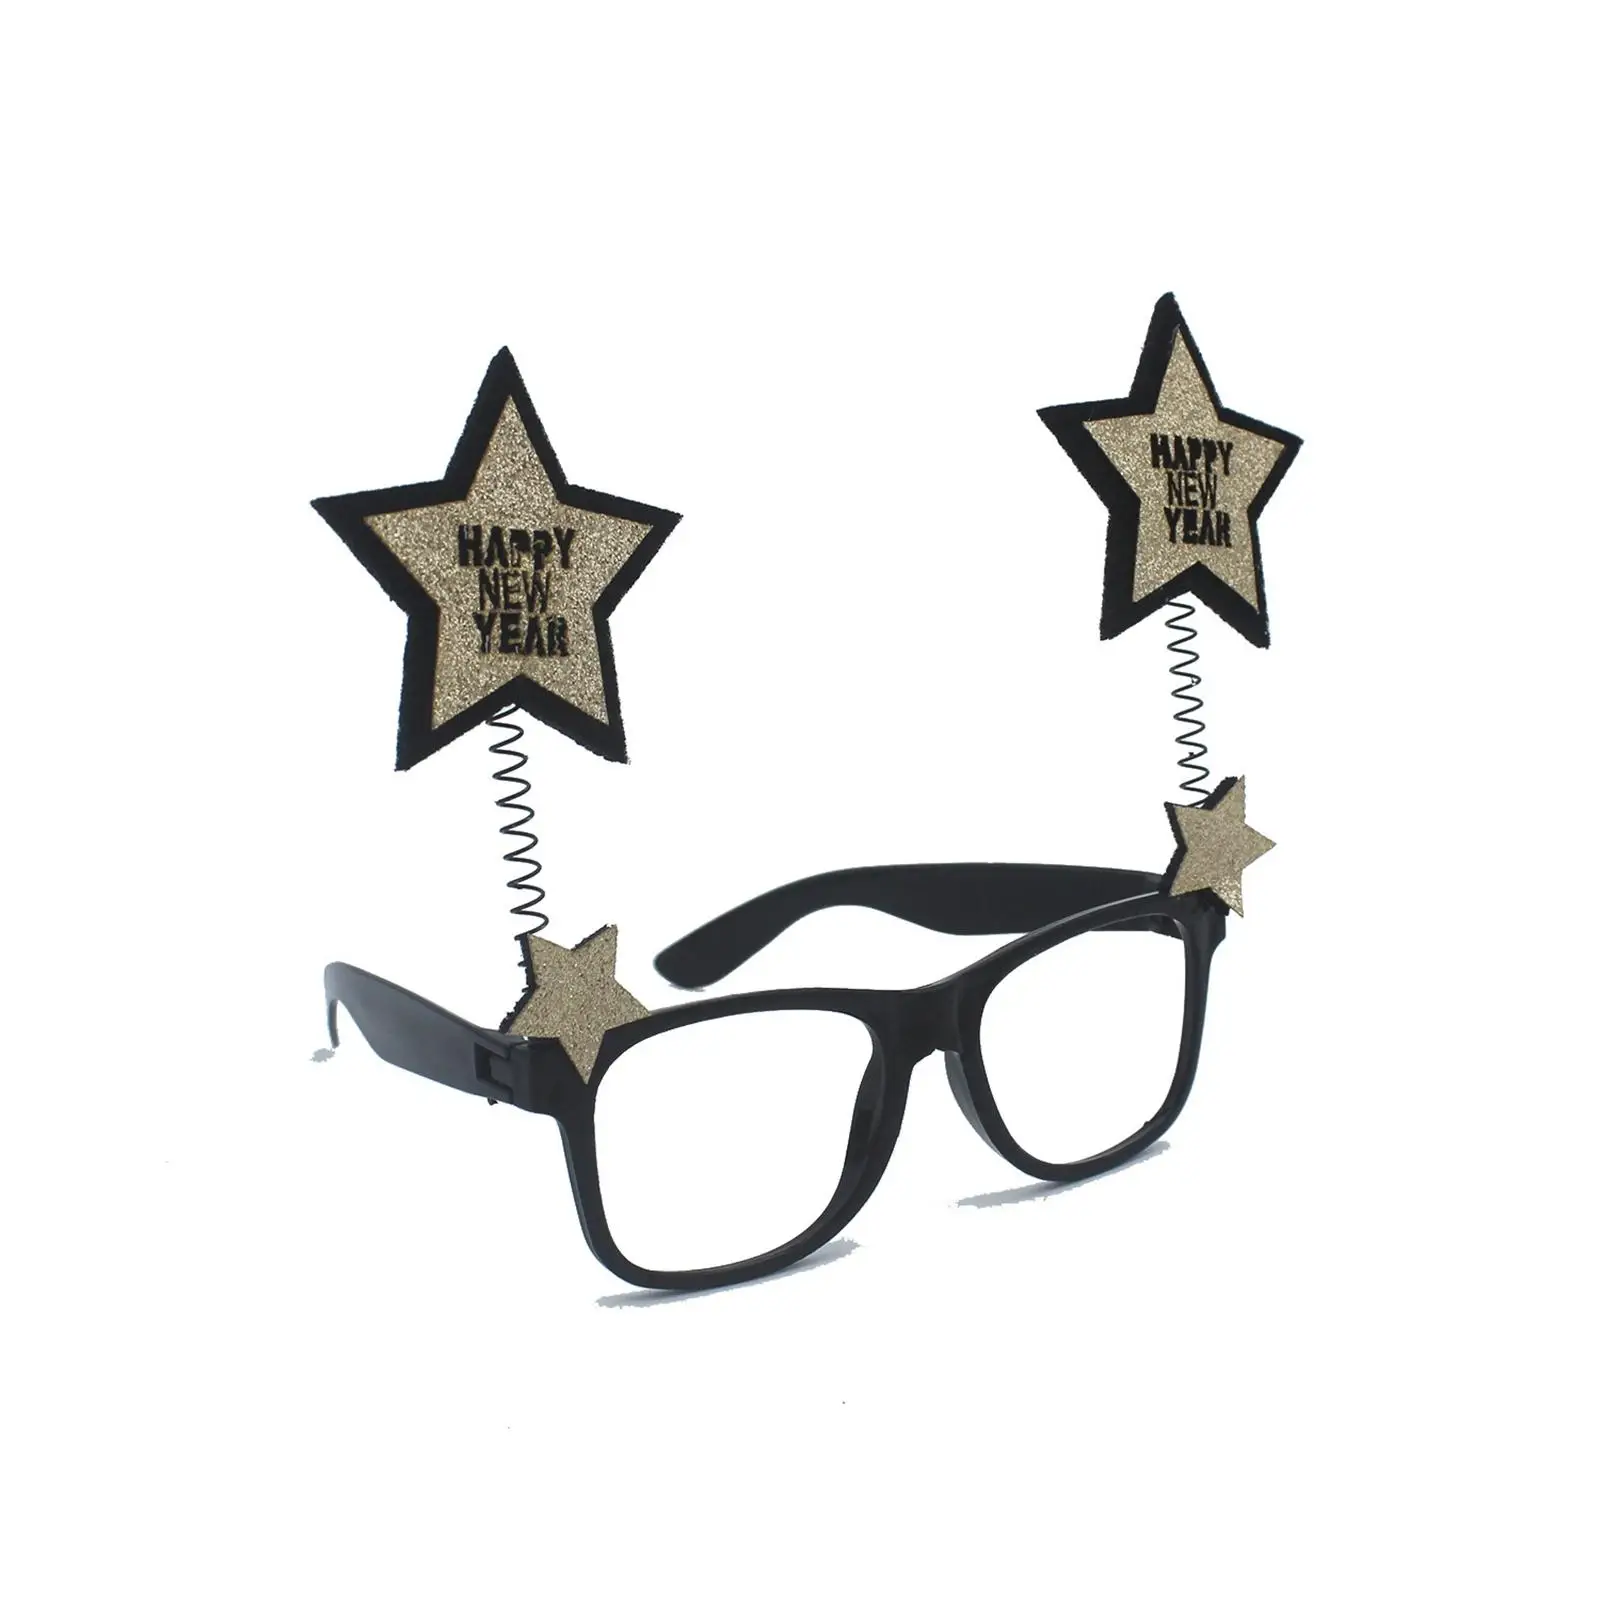 Fashion New Year Glasses Frame Party Supplies Fancy Eyeglasses Booth Props Costume Accessories for Carnival Decoration